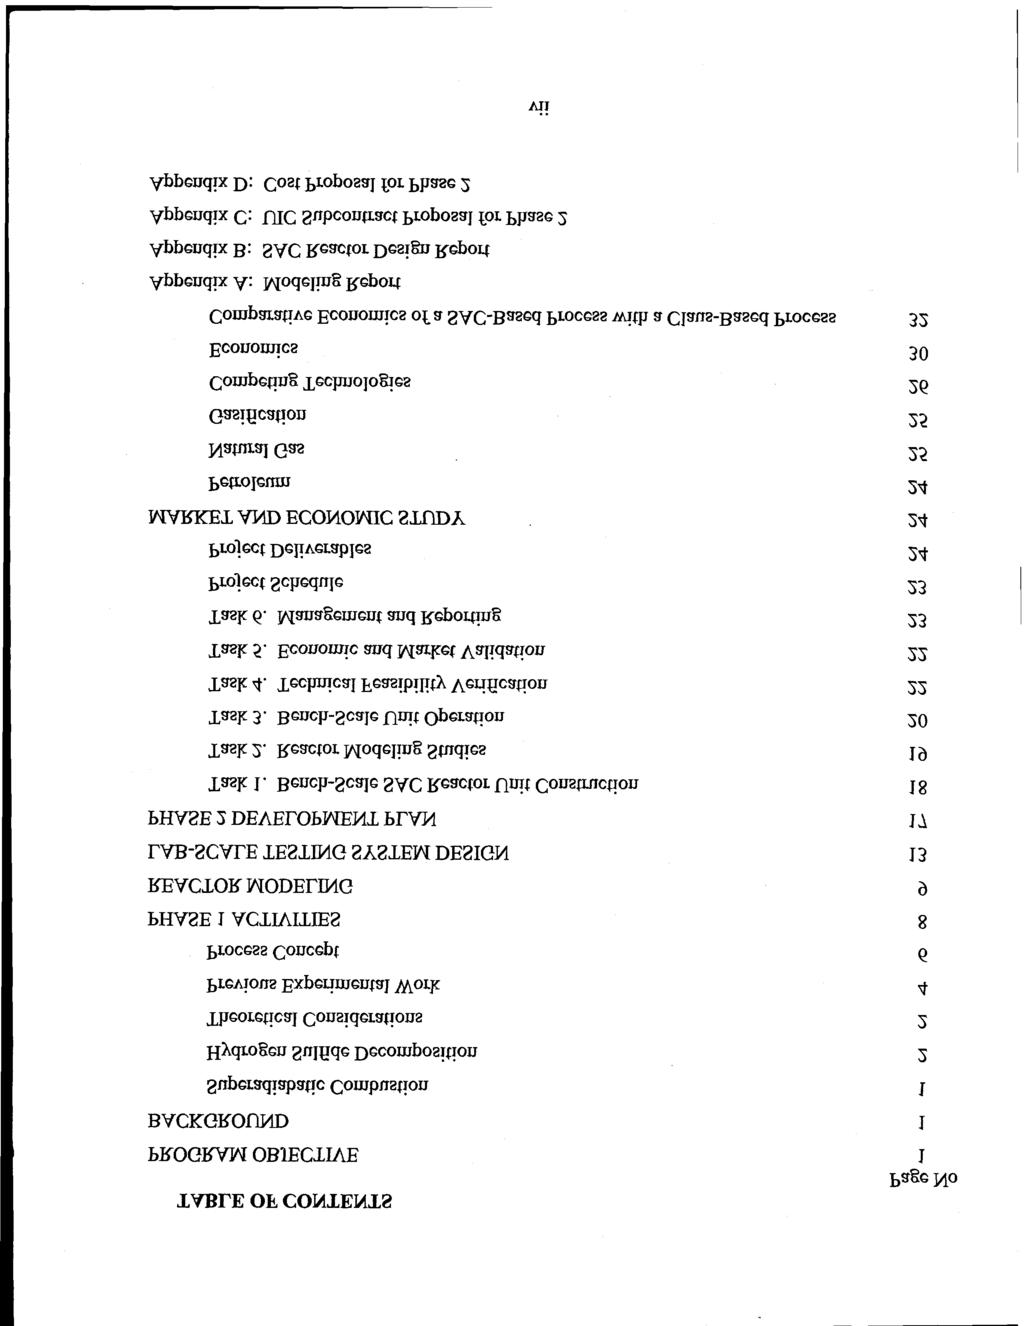 TABLE OF CONTENTS PROGRAM OBJECTIVE BACKGROUND Superadiabatic Combustion Hydrogen Sulfide Decomposition Theoretical Considerations Previous Experimental Work Process Concept PHASE 1 ACTIVITIES